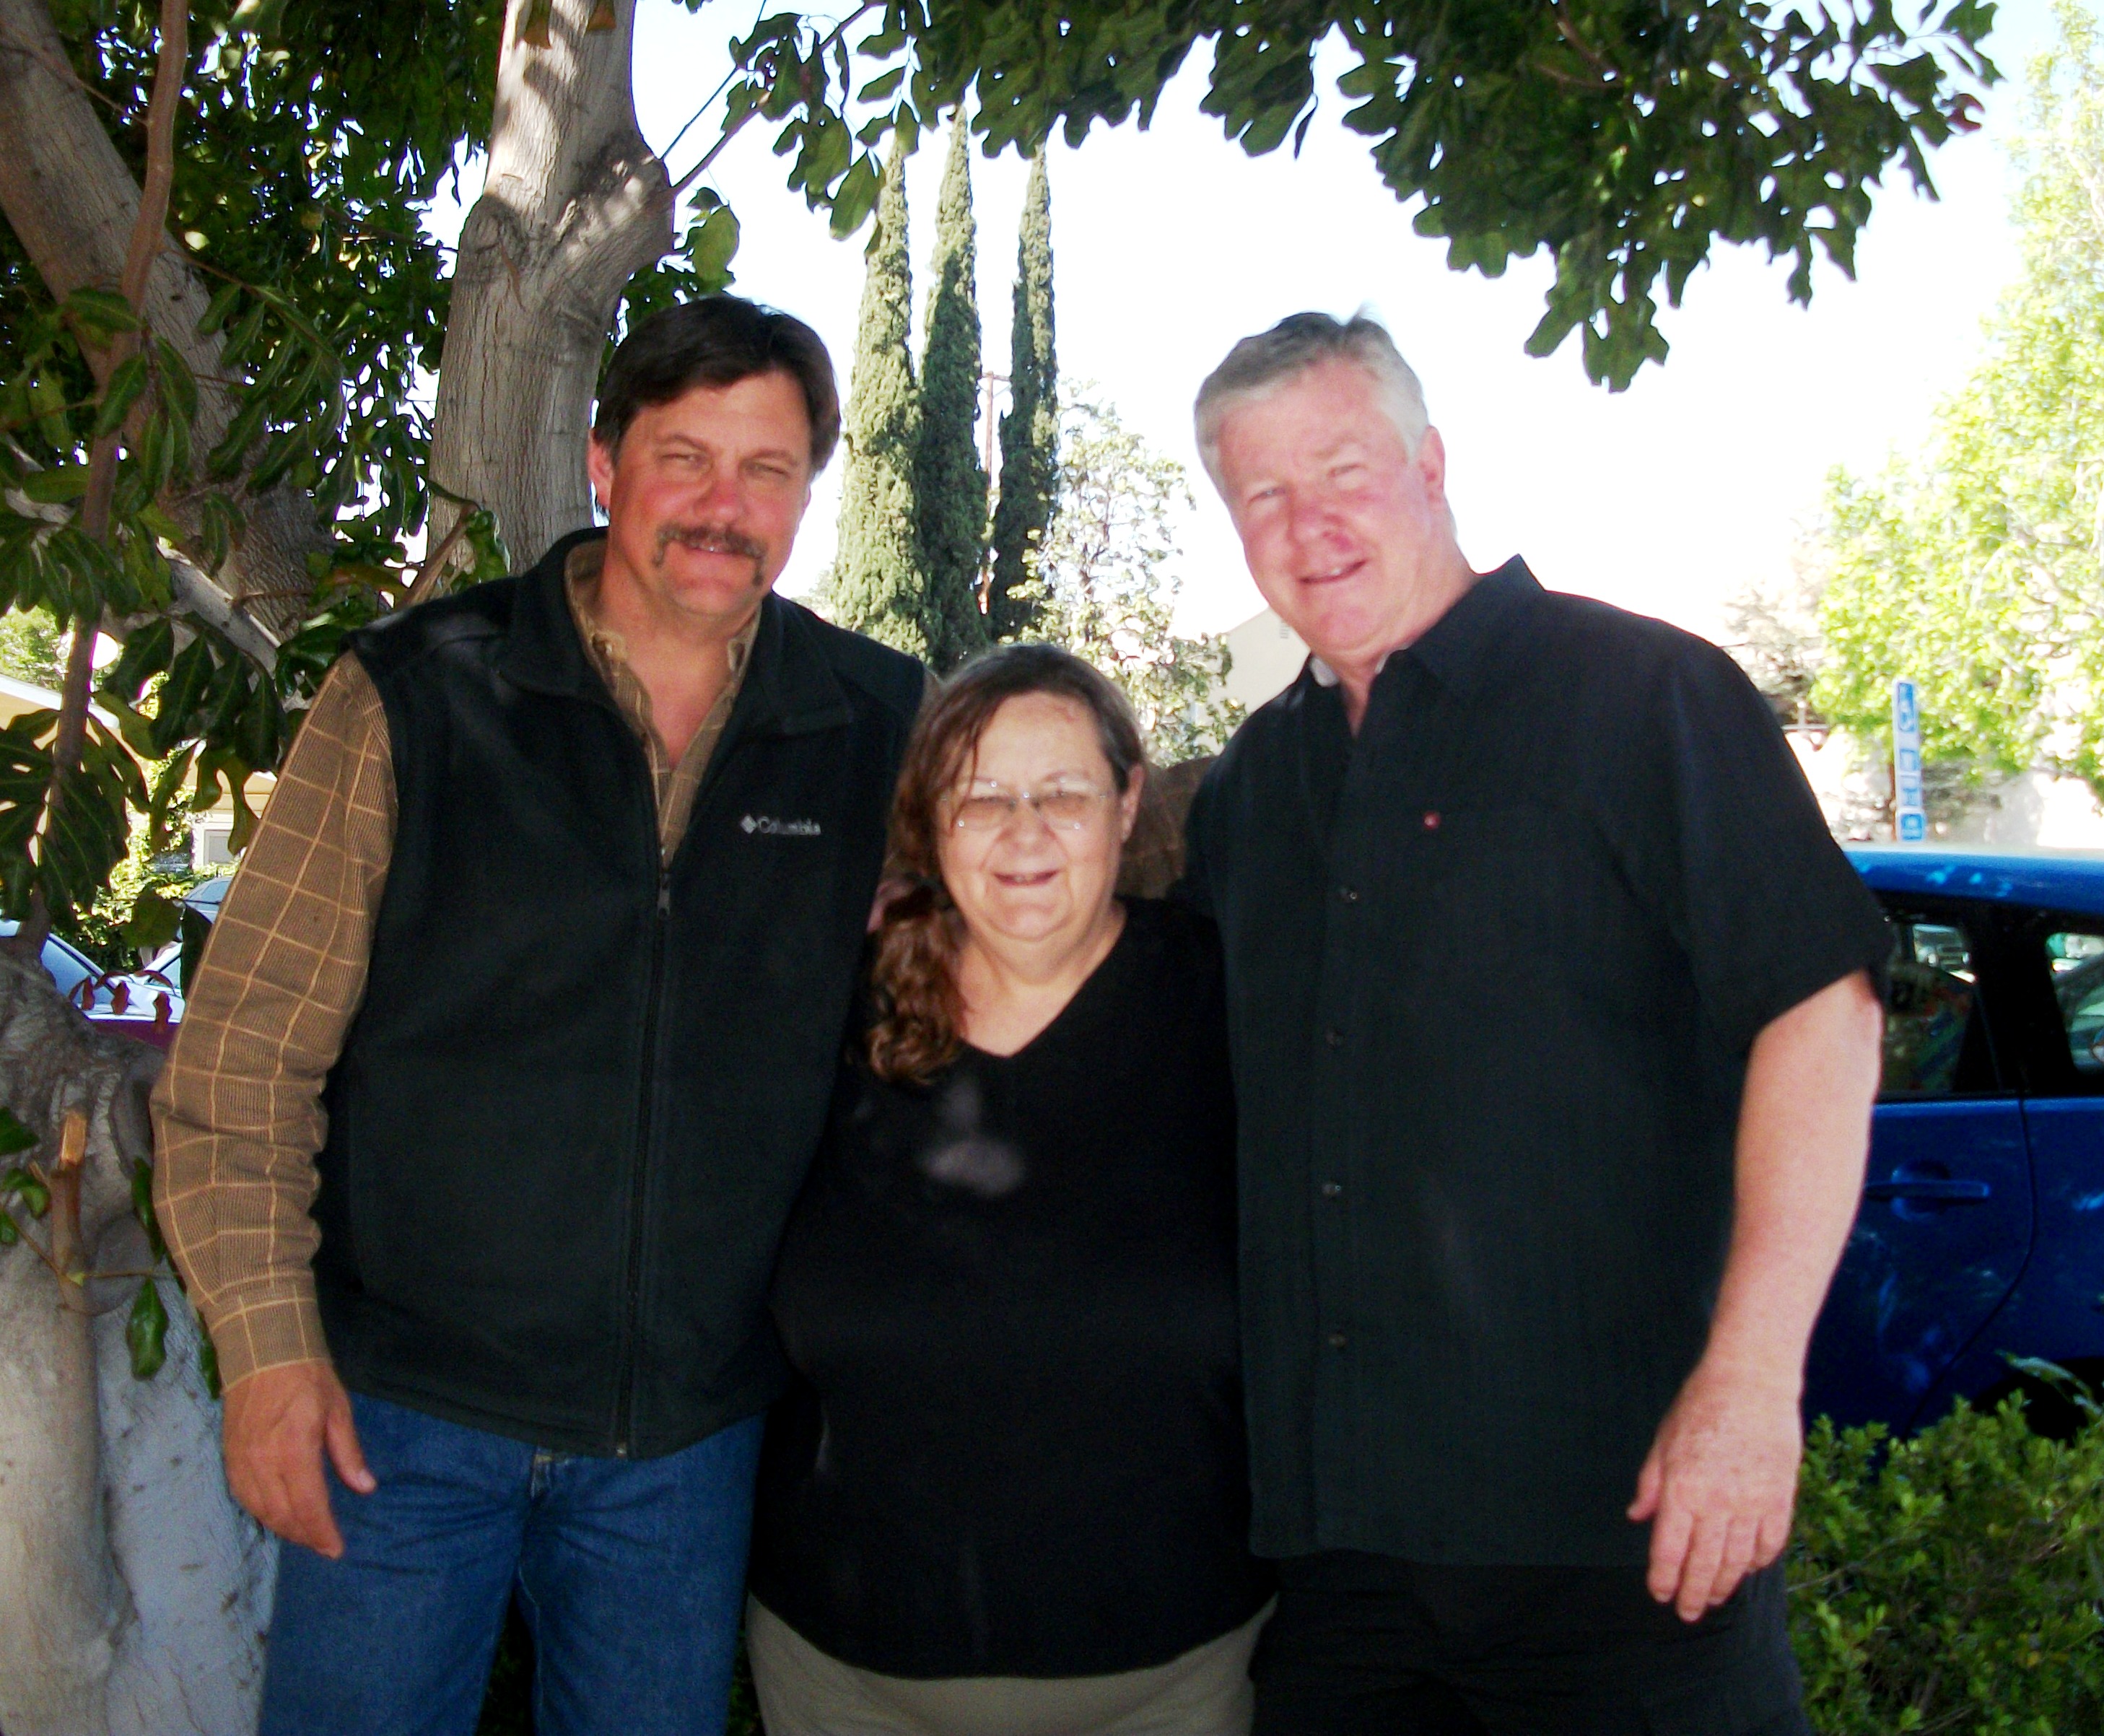 Glynn Praesel, Cheryl Whitman Dubuque, Larry Wilcox. Meeting for Cowboys and Heroes